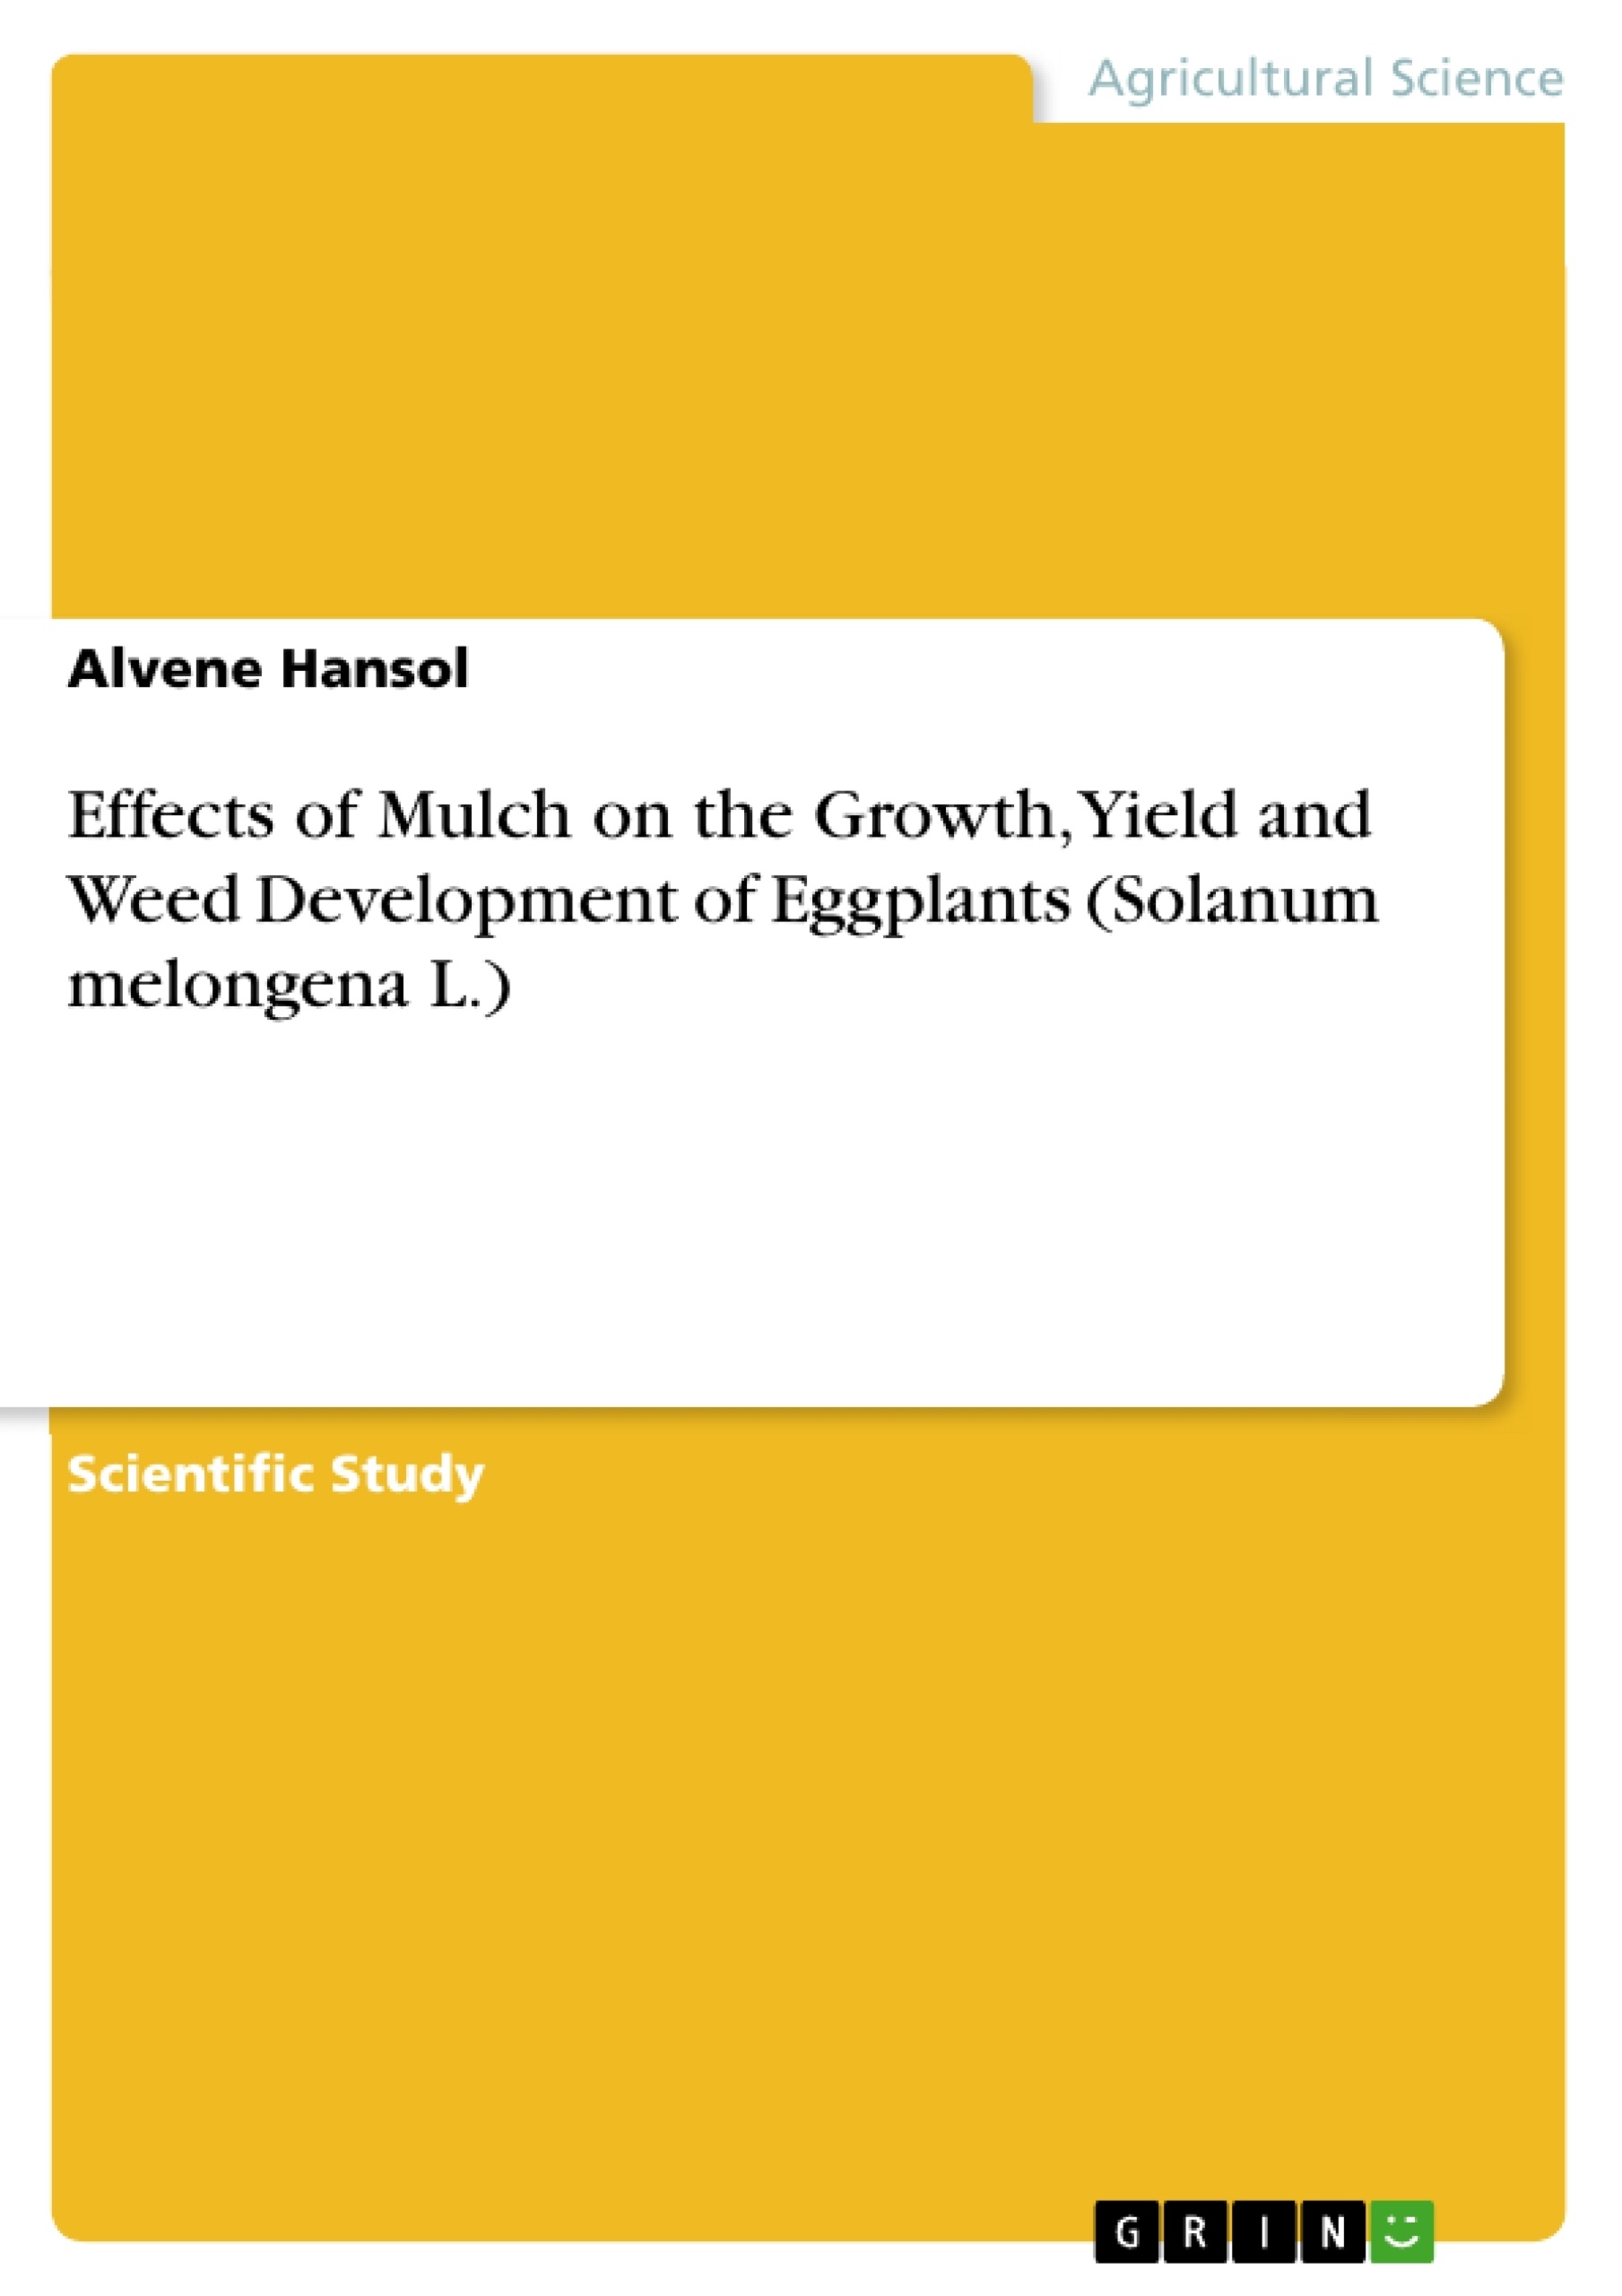 Title: Effects of Mulch on the Growth, Yield and Weed Development of Eggplants (Solanum melongena L.)